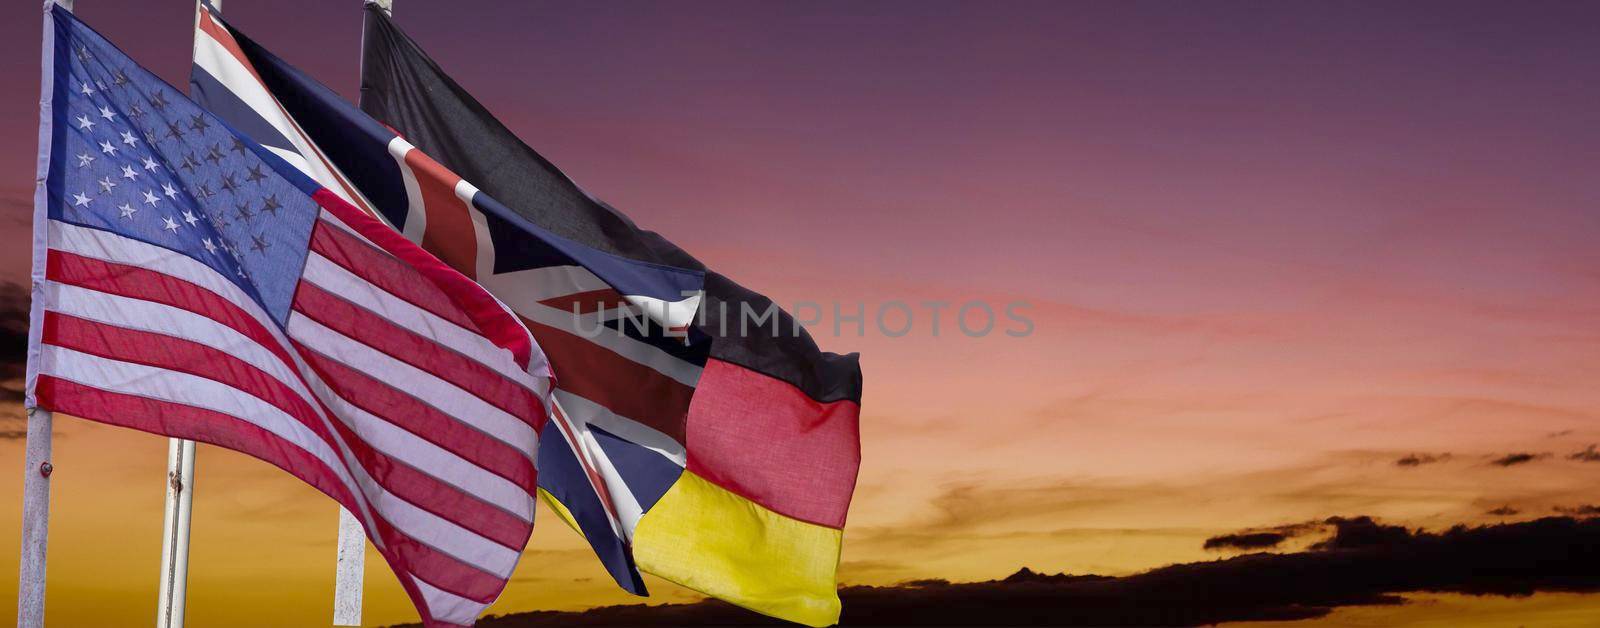 Flags of the World on cloud background with space for your text